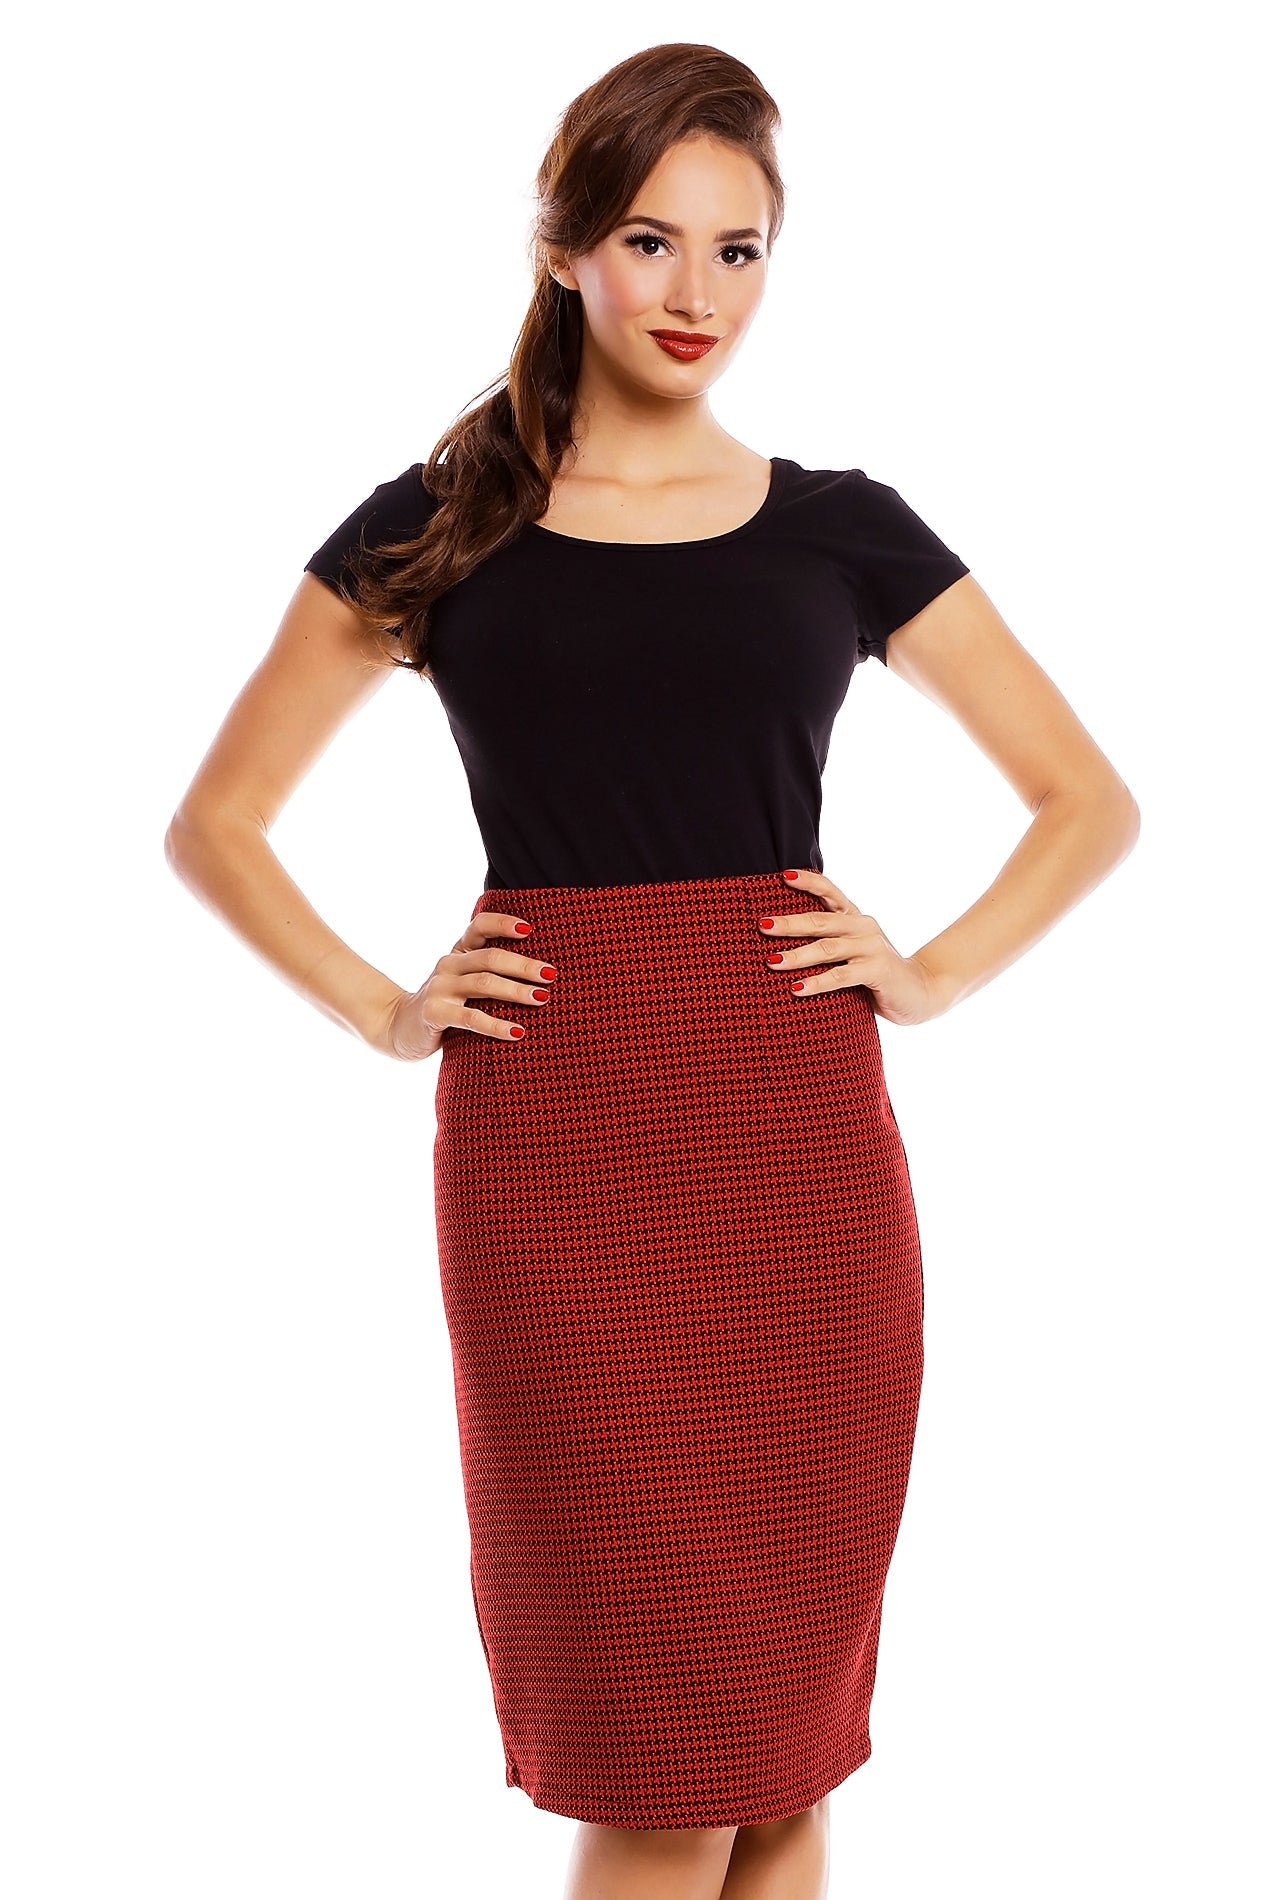 Chic Vintage Inspired Pencil Skirt in Red-Black